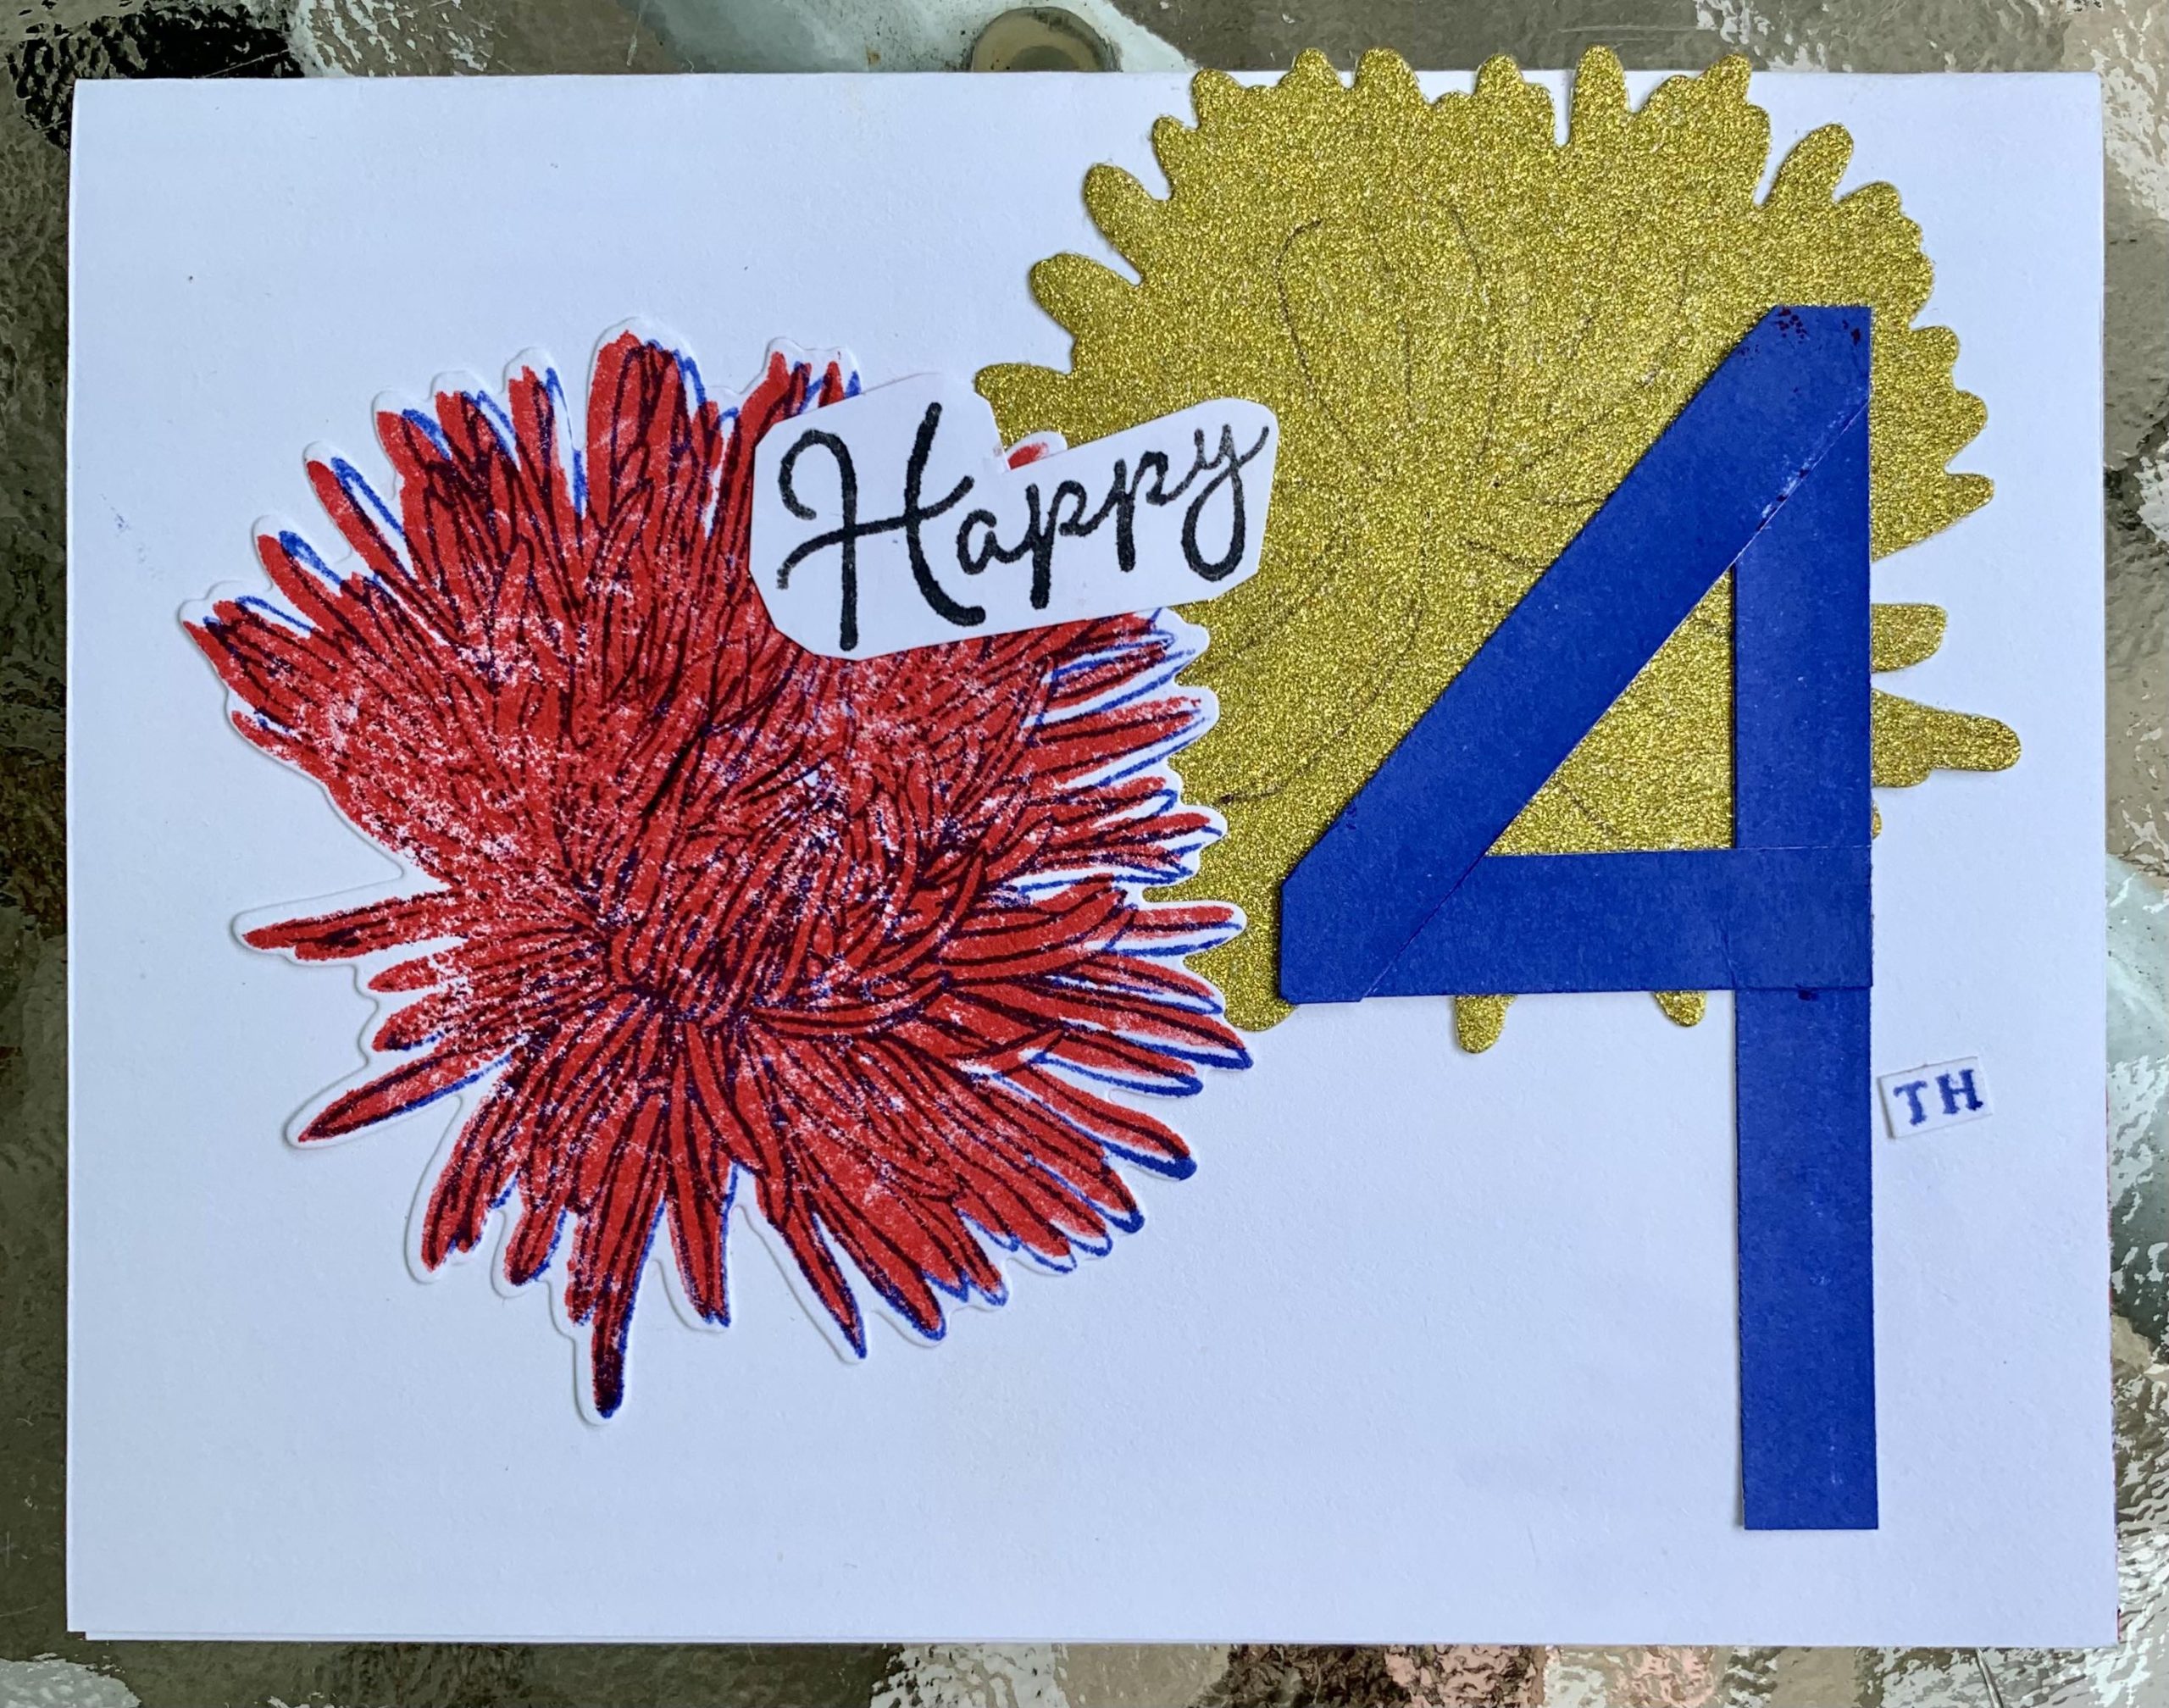 4th of July Card featuring fireworks and handmade cardstock by 10 yr old Jens